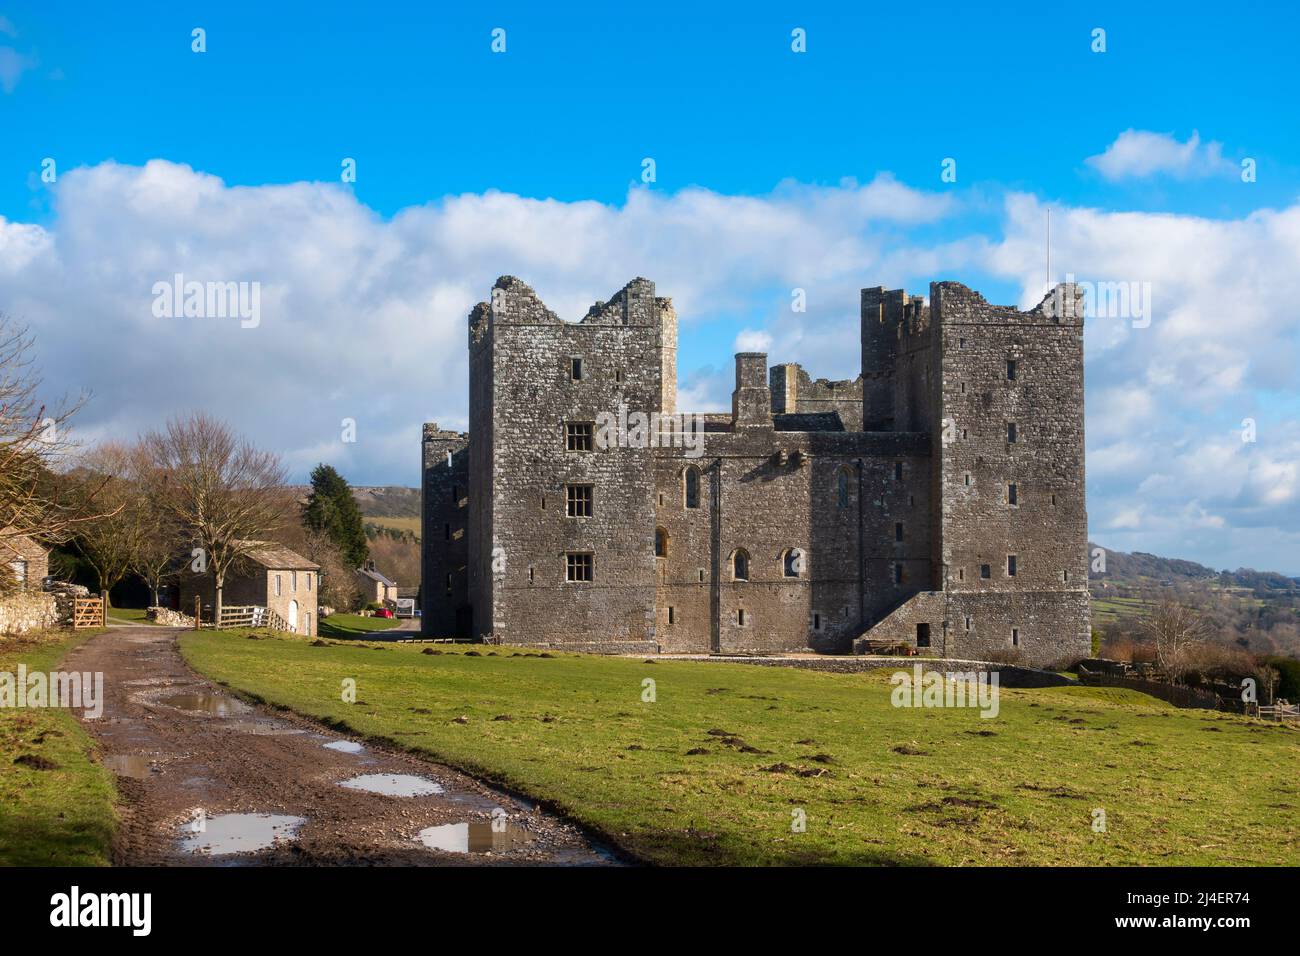 Bolton Castle, Wensleydale, Yorkshire Dales National Park. Fourteenth Century castle, still owned by the descendents of the builder. Stock Photo